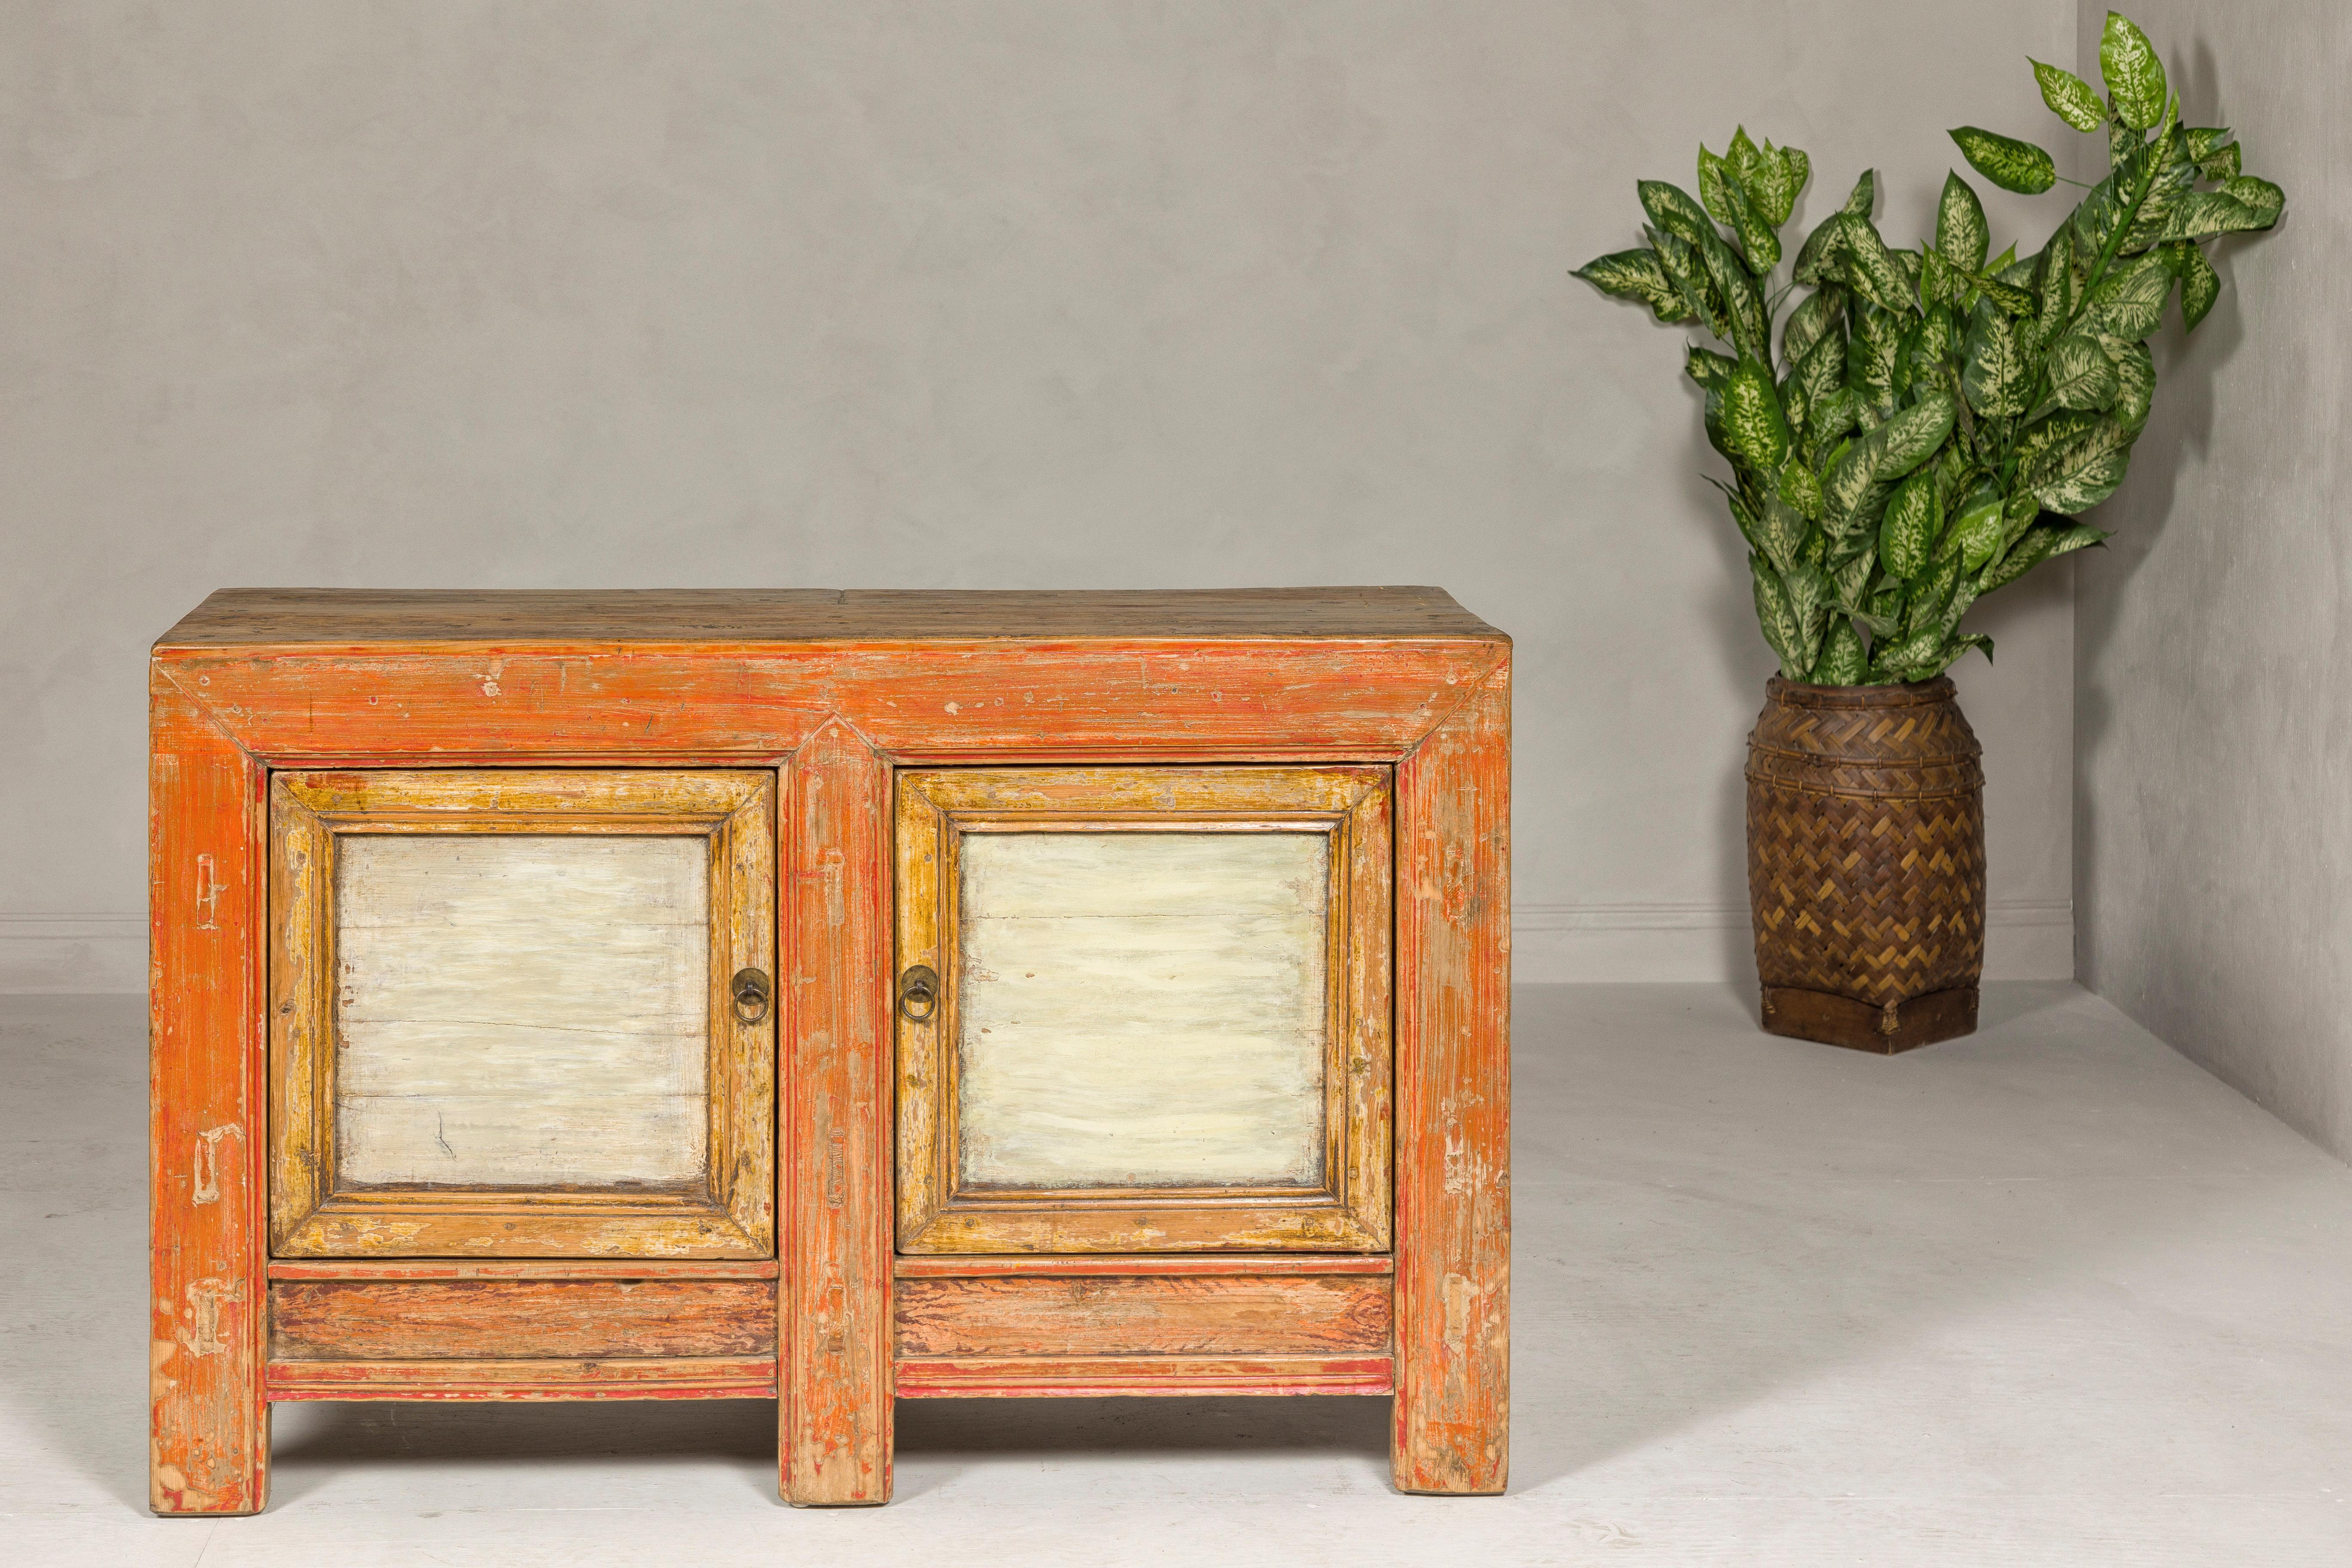 A Country style two-door buffet from the Midcentury period with distressed orange and off-white hand-painted color. Experience the charm and warmth of this Country style two-door buffet from the Midcentury period, a piece that beautifully showcases